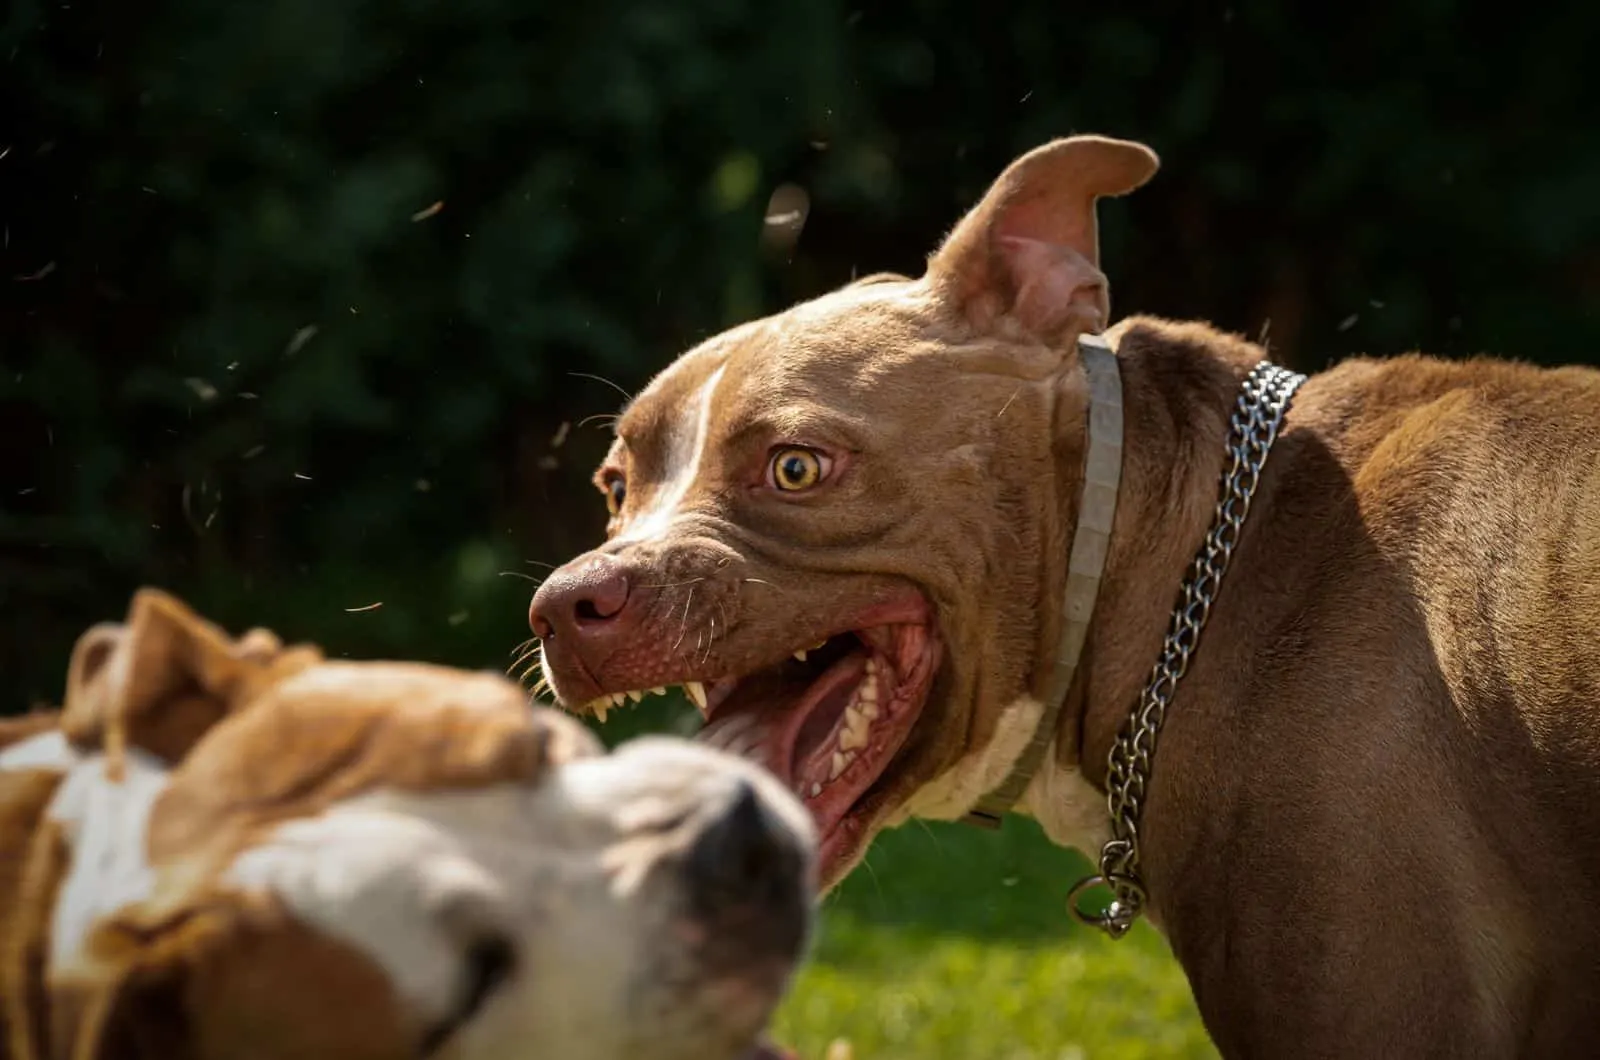 Two dogs amstaff terrier fighting